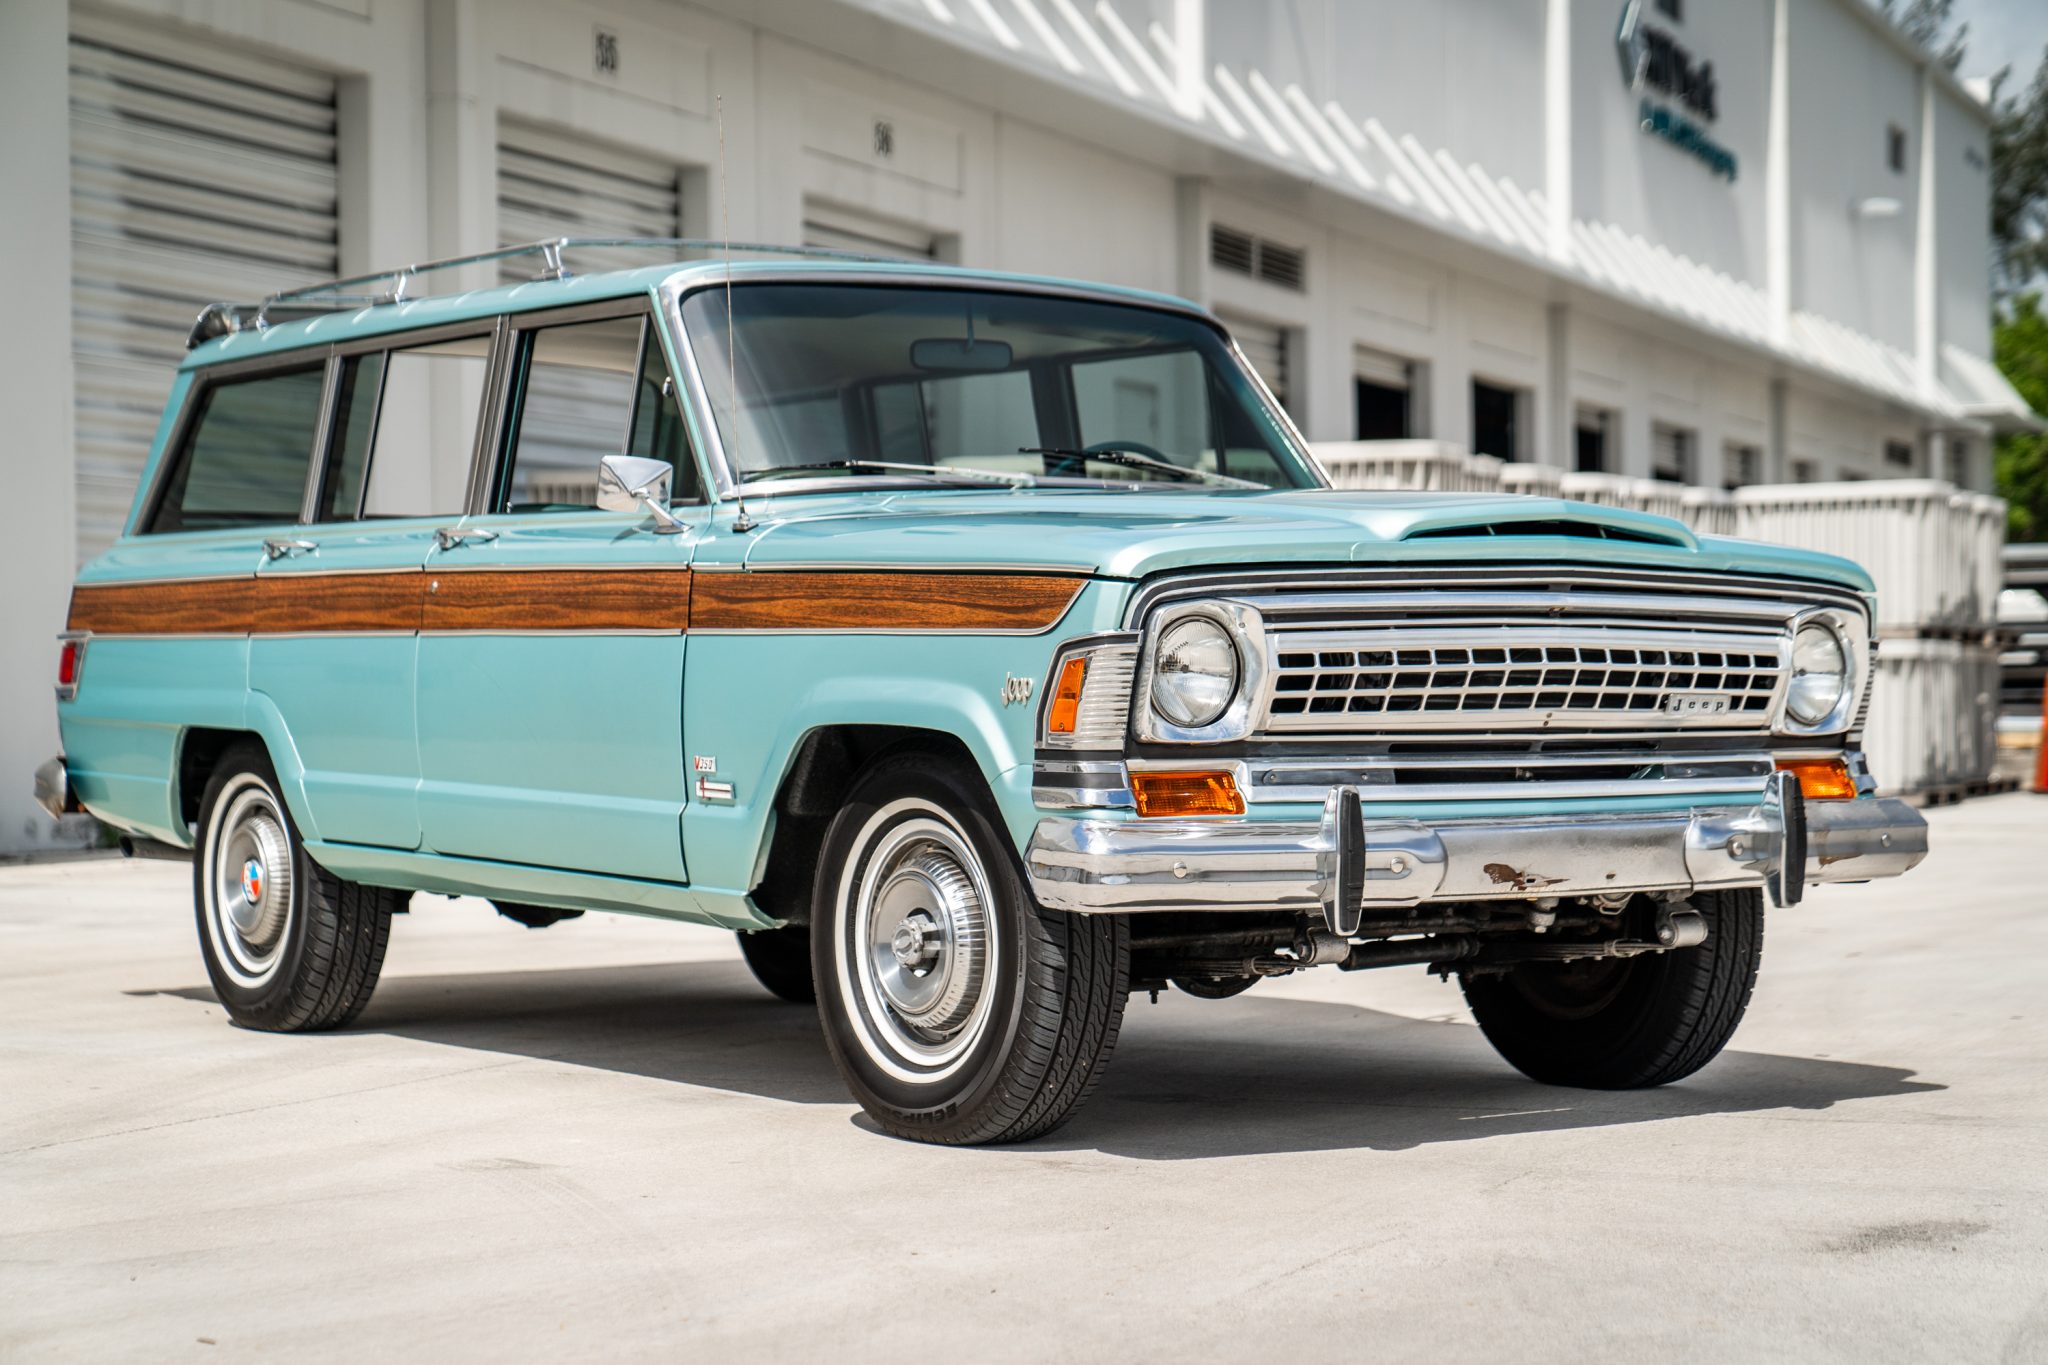 Used 1970 Jeep Wagoneer Review